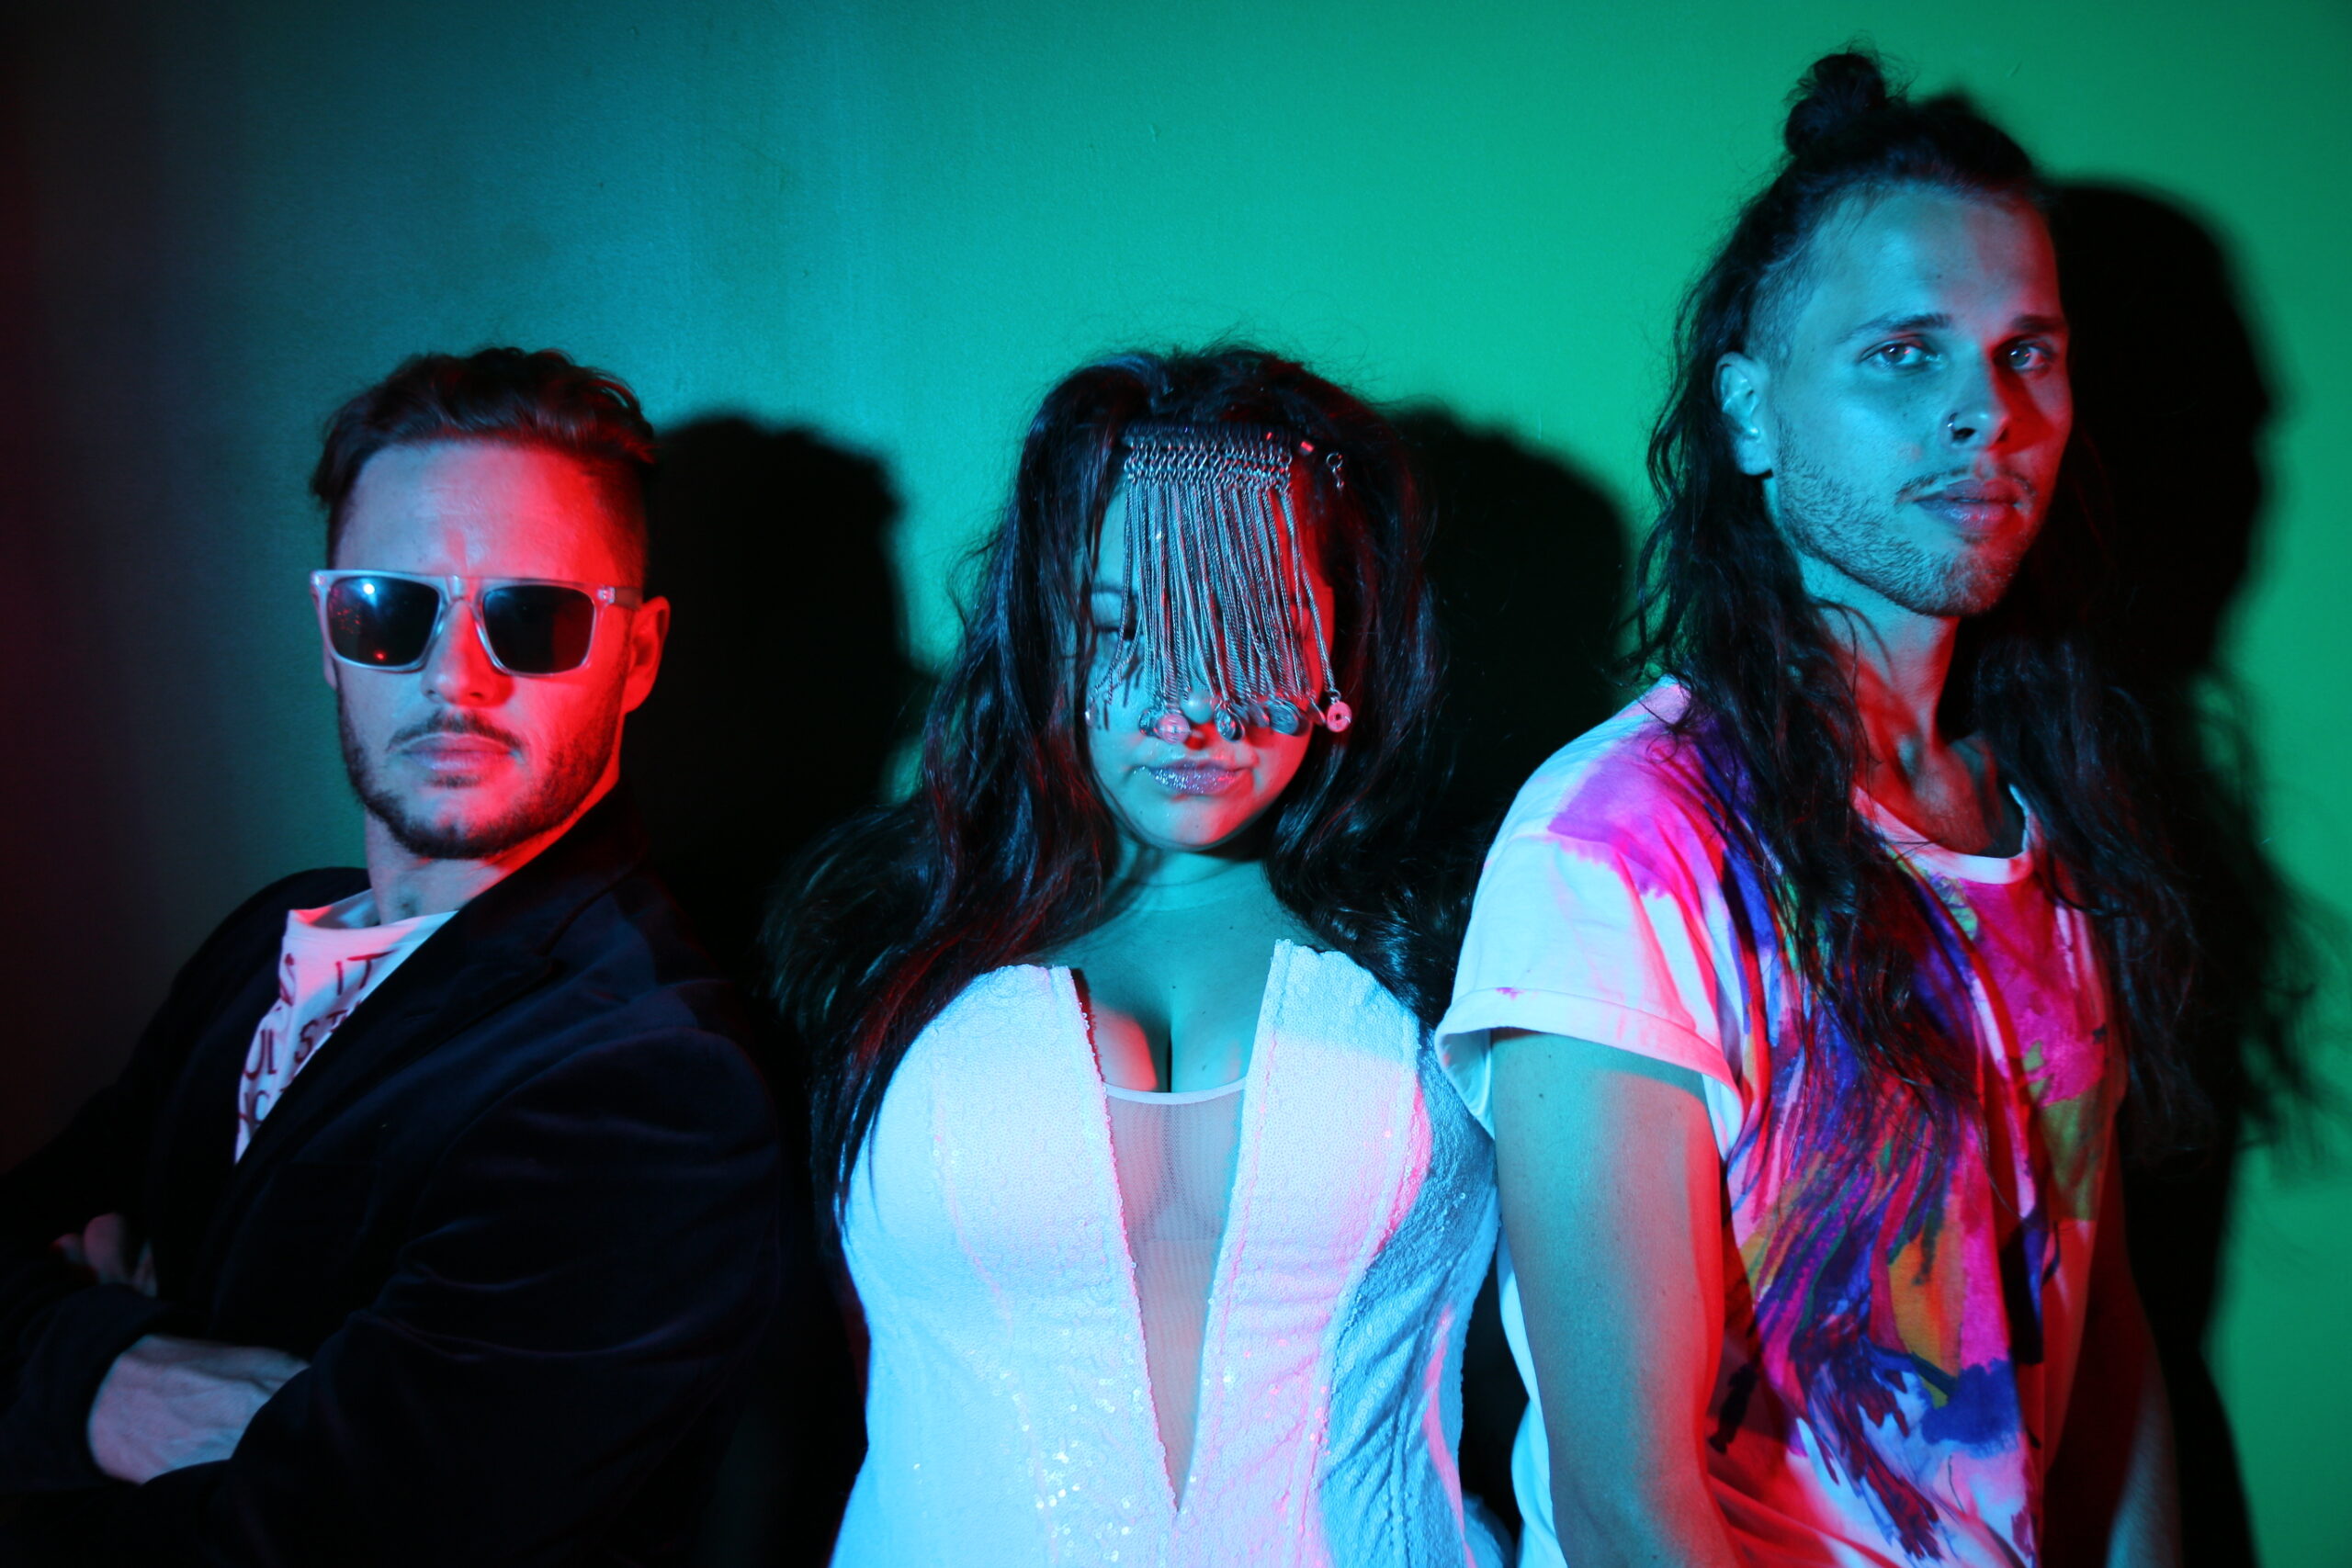 Bow and Arrow Release Electrifying New Single "Triad"